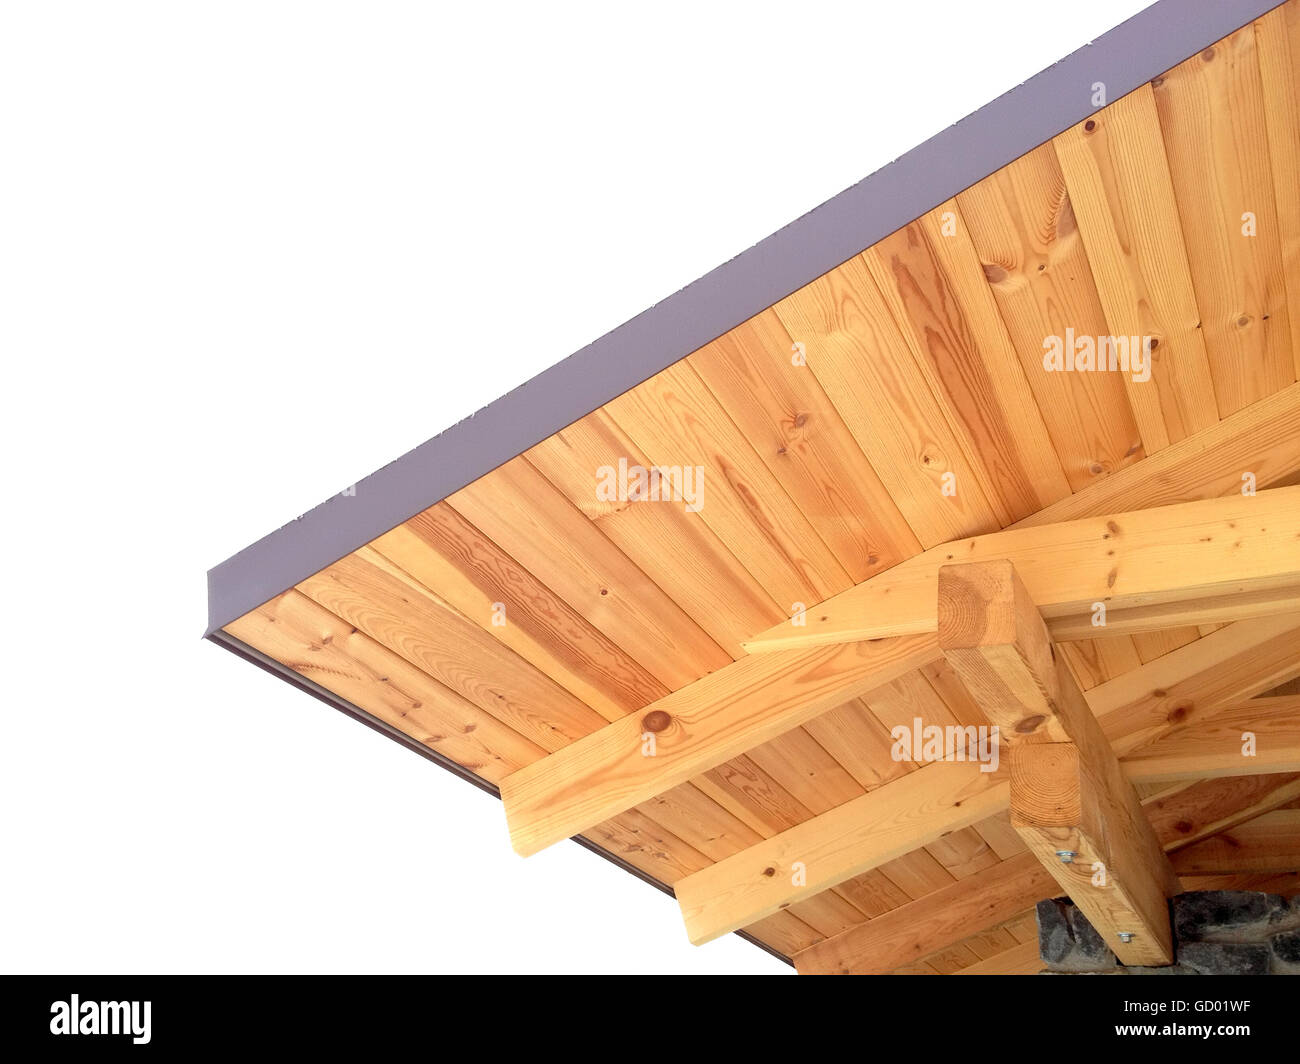 roof structure with wooden rafters in traditional style Stock Photo